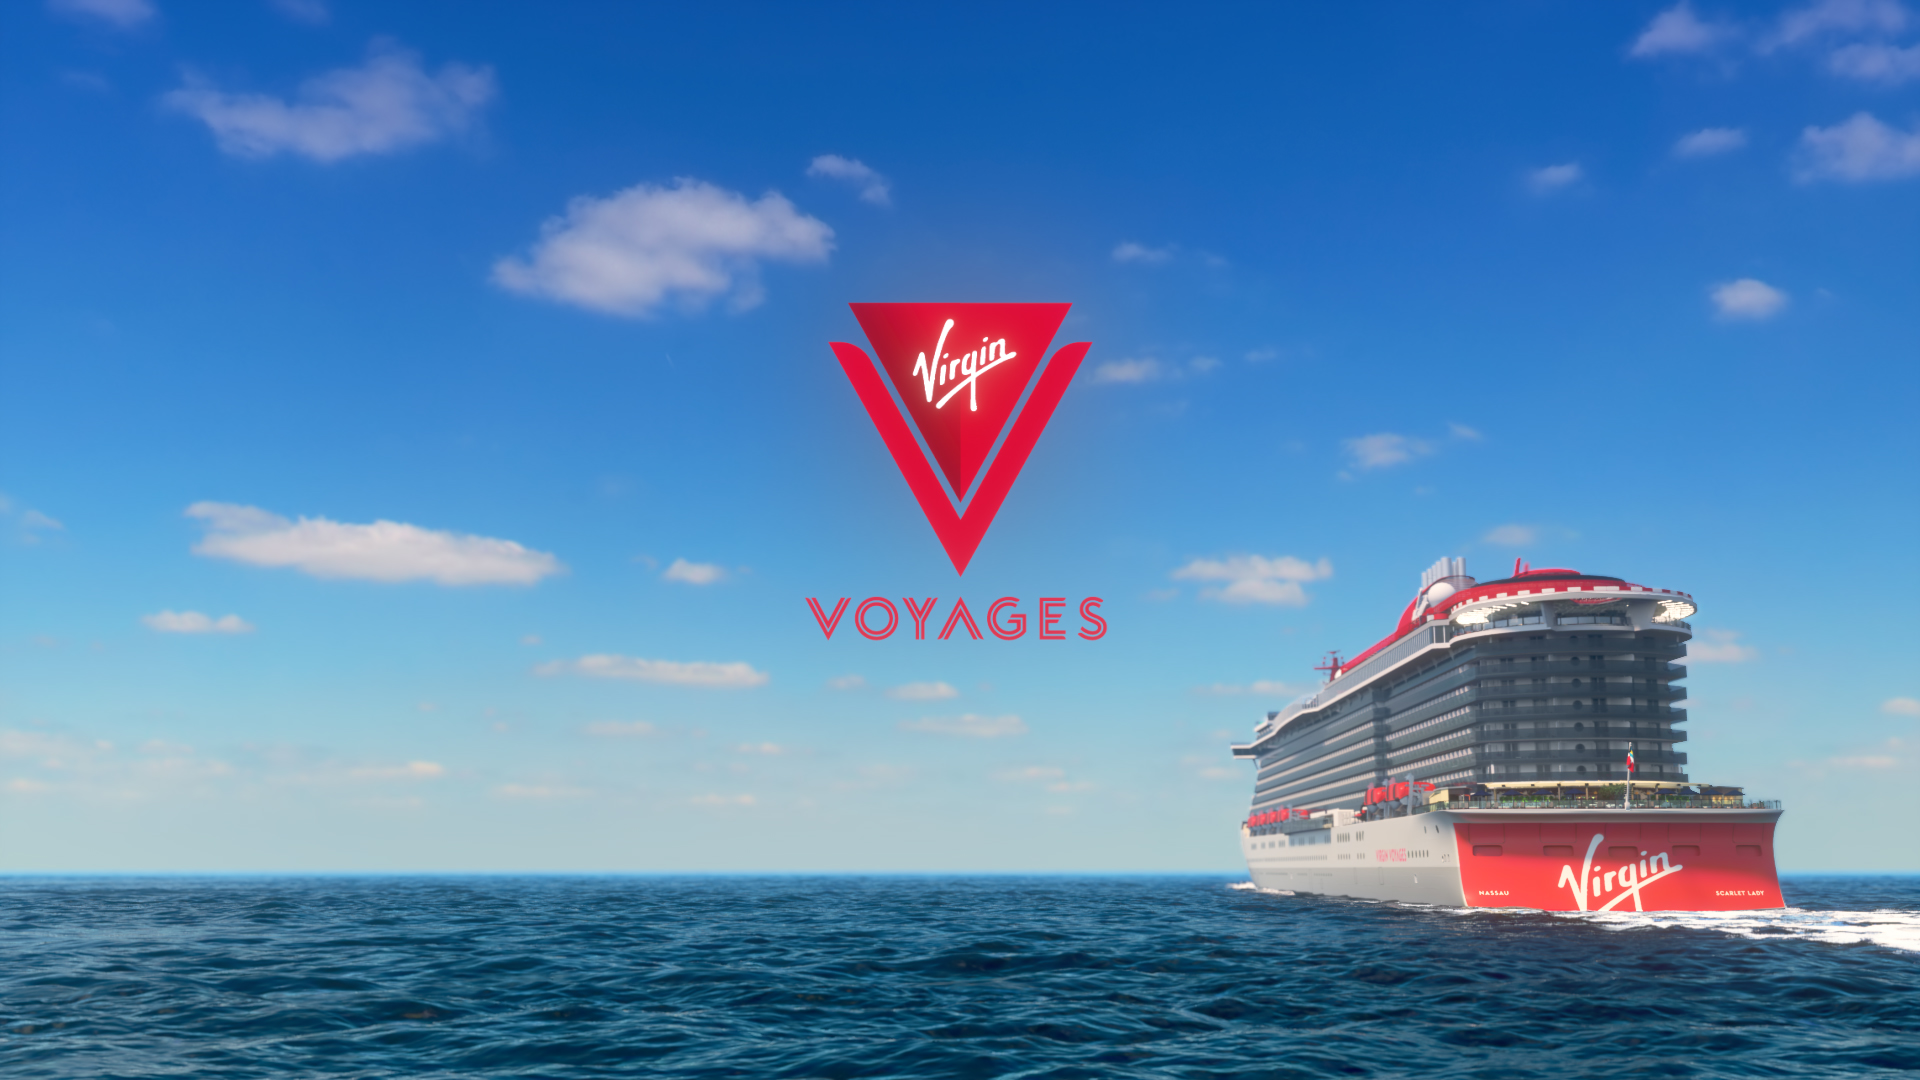 virgin voyages travel agent contact